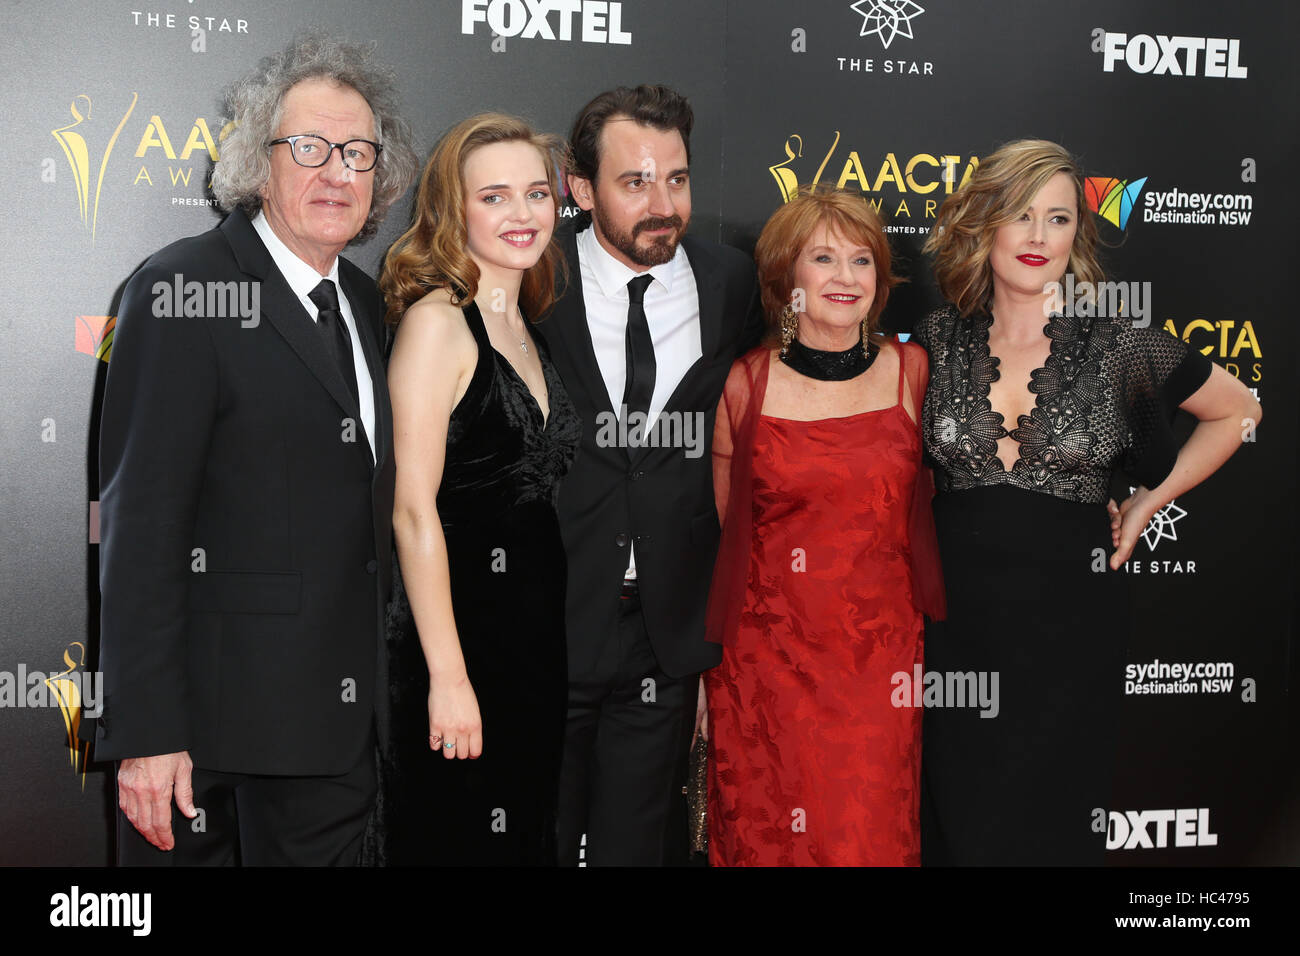 Sydney, Australia. 7 December 2016. Pictured, 'The Daughter' cast and crew, L-R: Geoffrey Rush (Actor - Henry Nielsen), Odessa Young (Actress – Hedvig Finch), Ewen Leslie (Actor - Oliver Finch), Jan Chapman (Producer) and Nicole O’Donohue (Producer). Celebrities, award nominees and industry figures attend the 6th AACTA (Australian Academy of Cinema and Television Arts) Awards at The Star, Pyrmont to celebrate screen excellence. Credit: Credit:  Richard Milnes/Alamy Live News Stock Photo